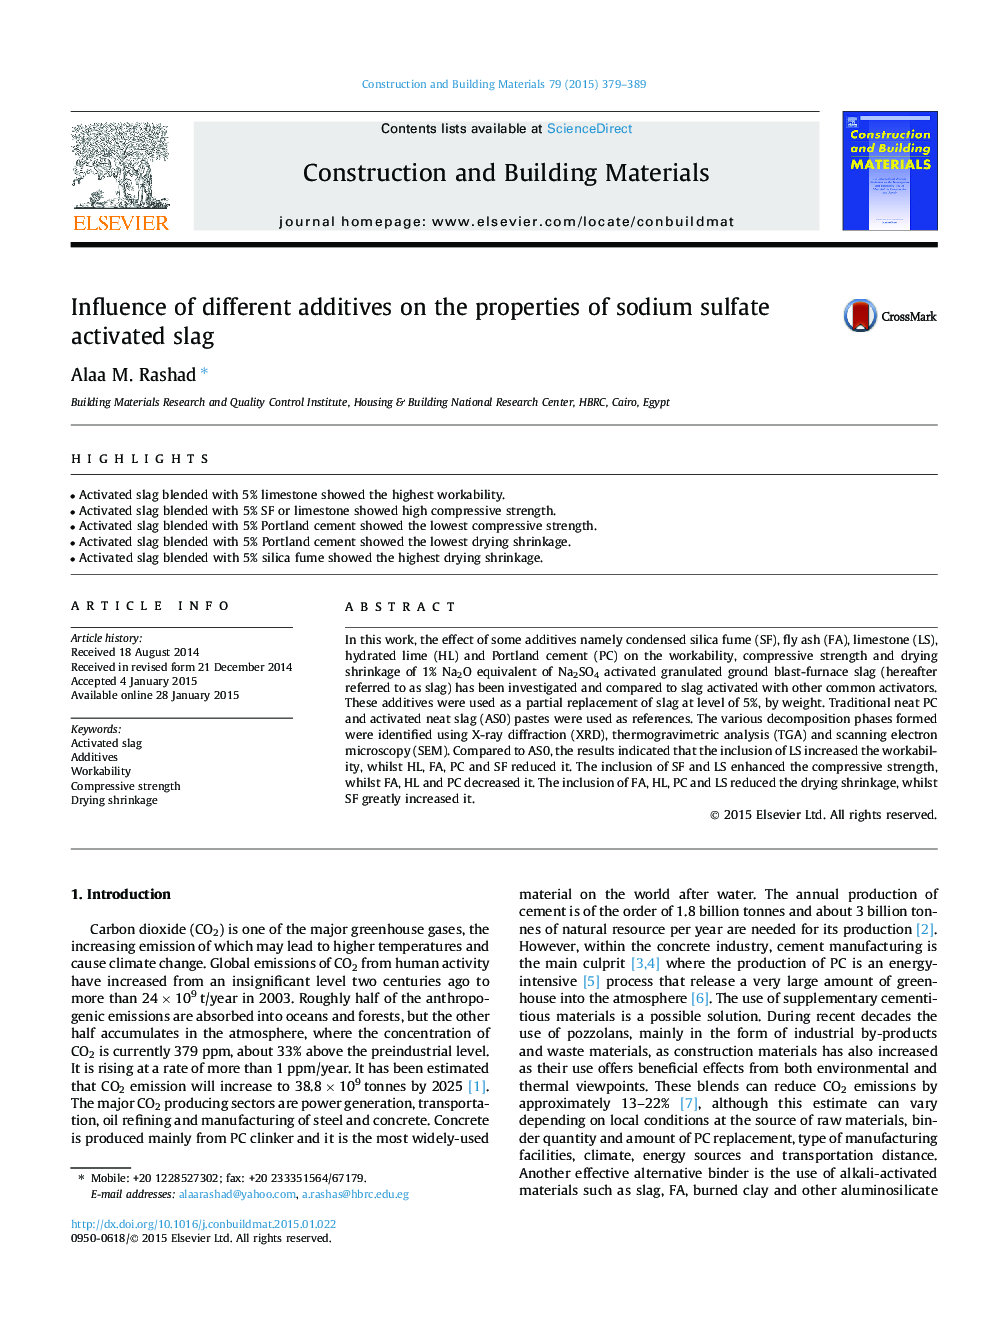 Influence of different additives on the properties of sodium sulfate activated slag